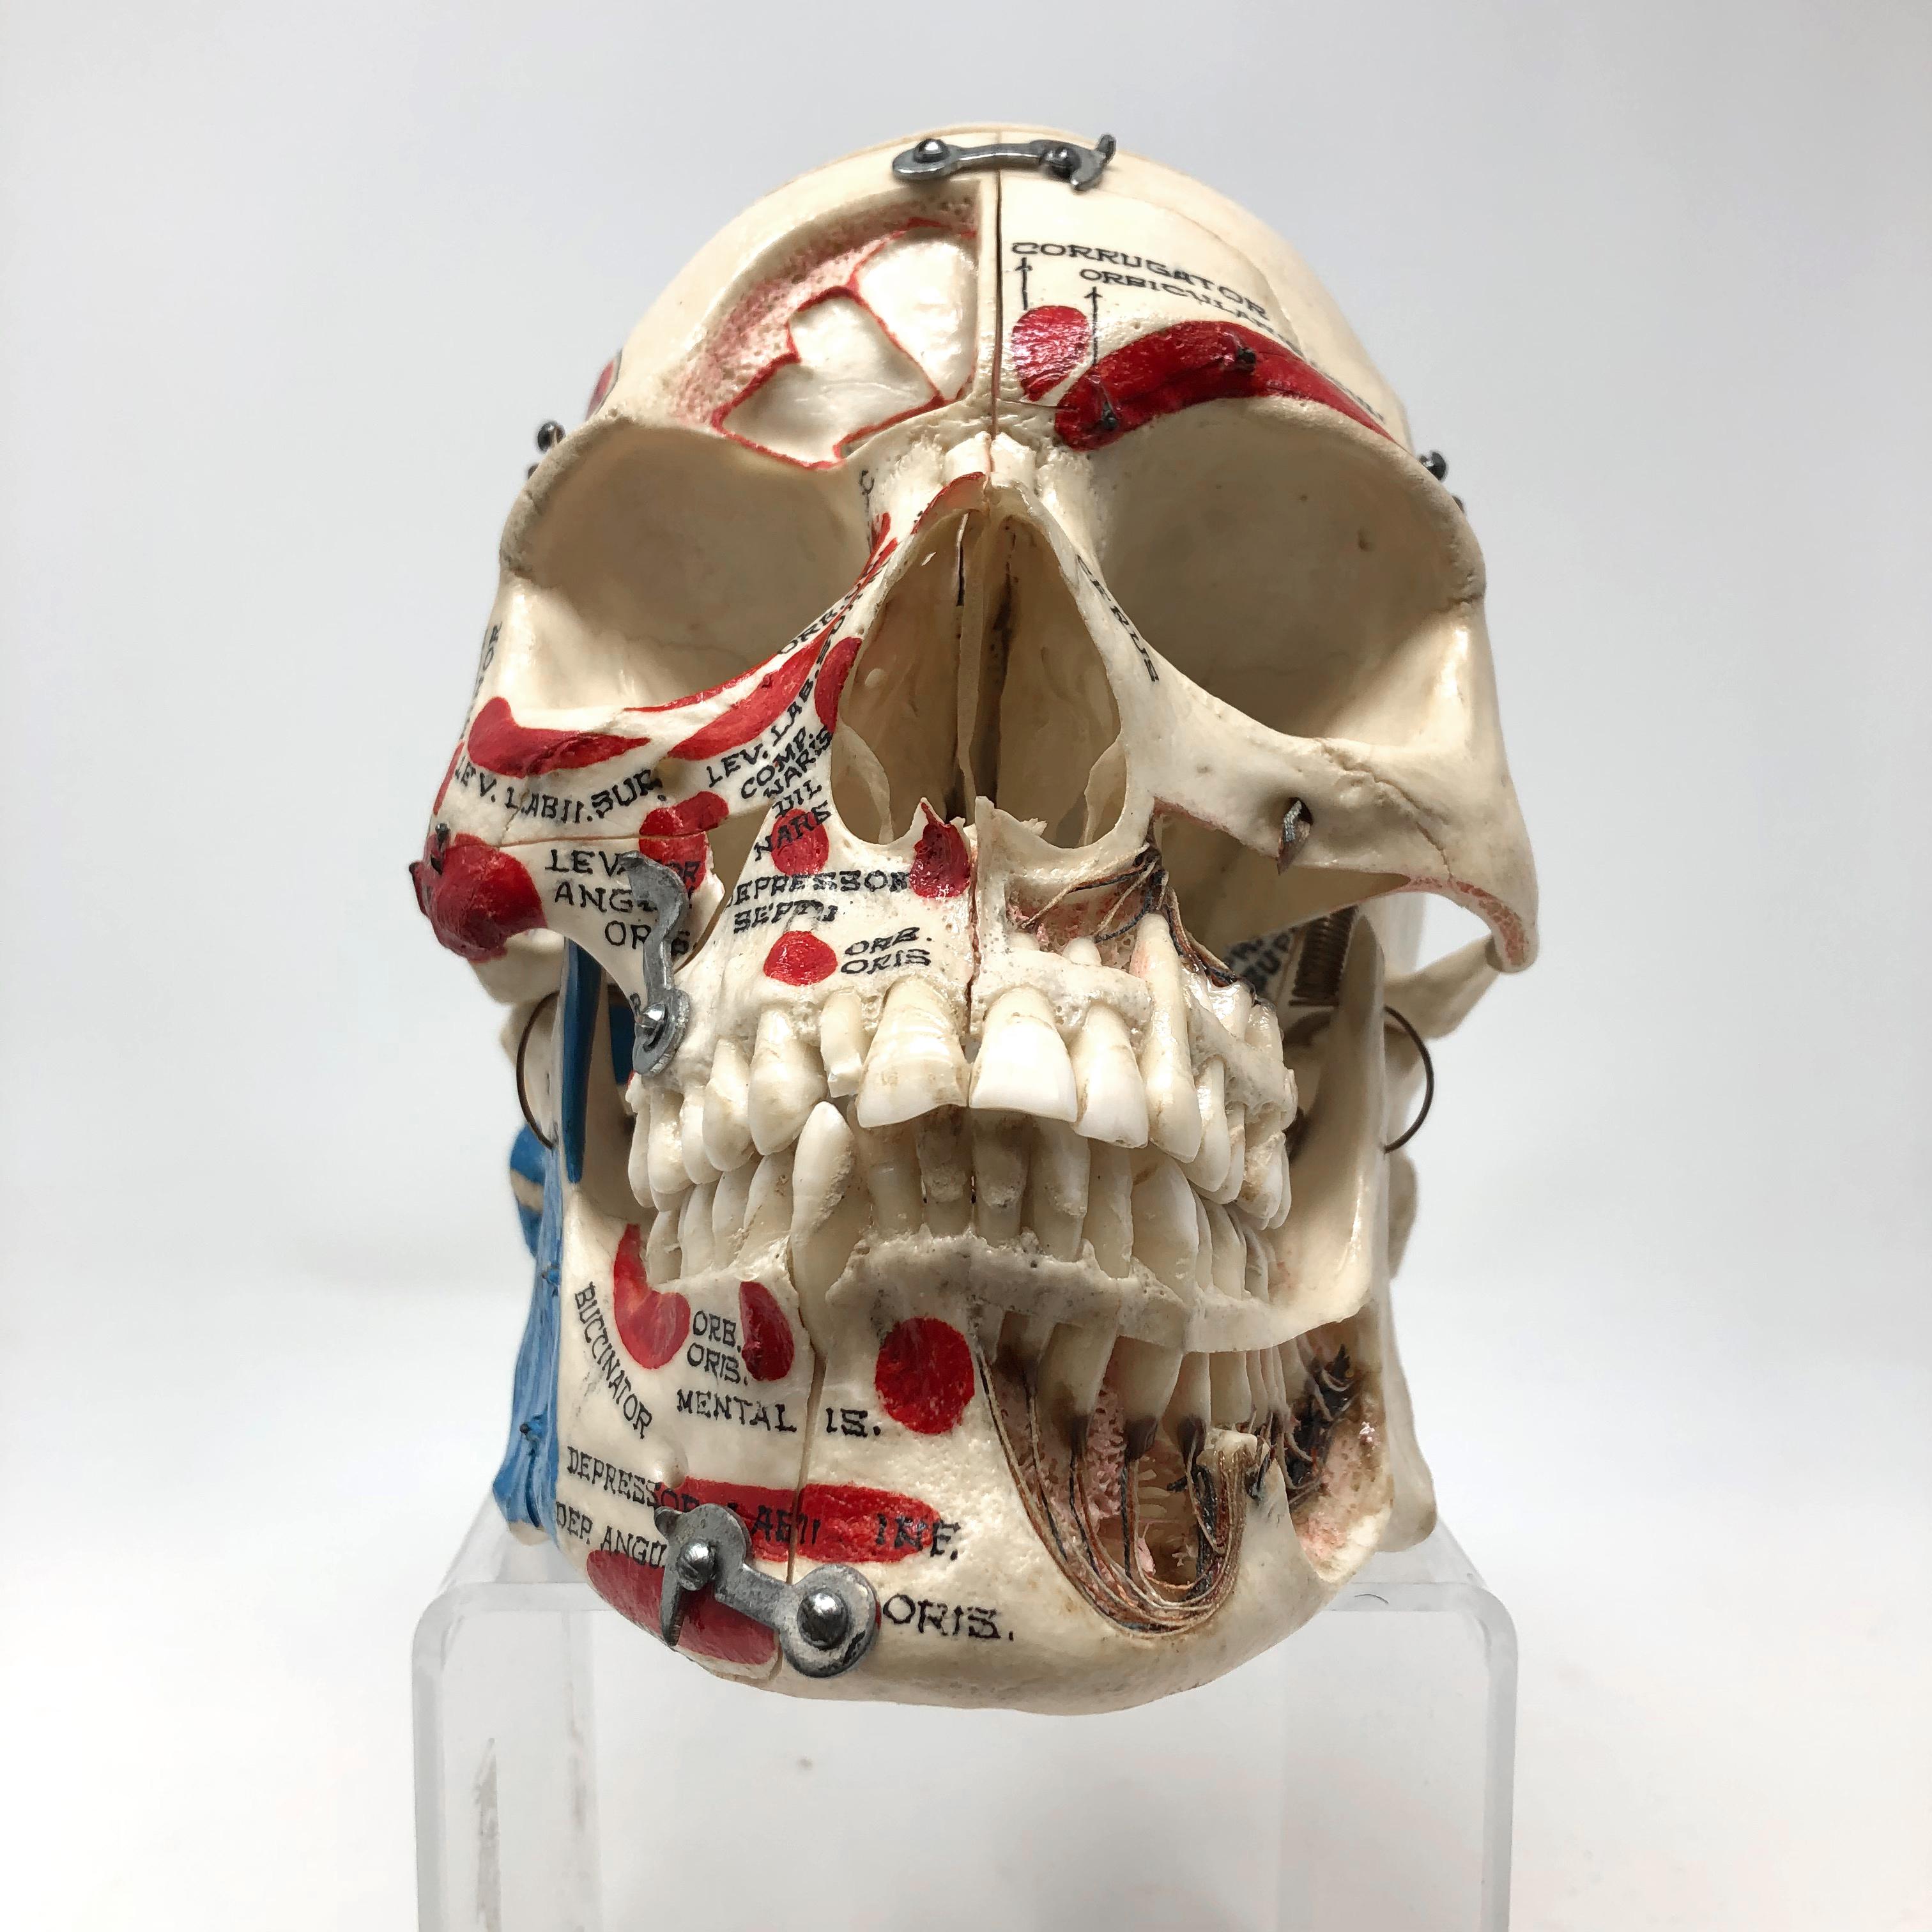 Prepared by legendary medical supply company Kilgore International, this is an advanced anatomical reference human skull! 

An exceptional authentic vintage example, this human skull has been meticulously labeled inside and out to create an